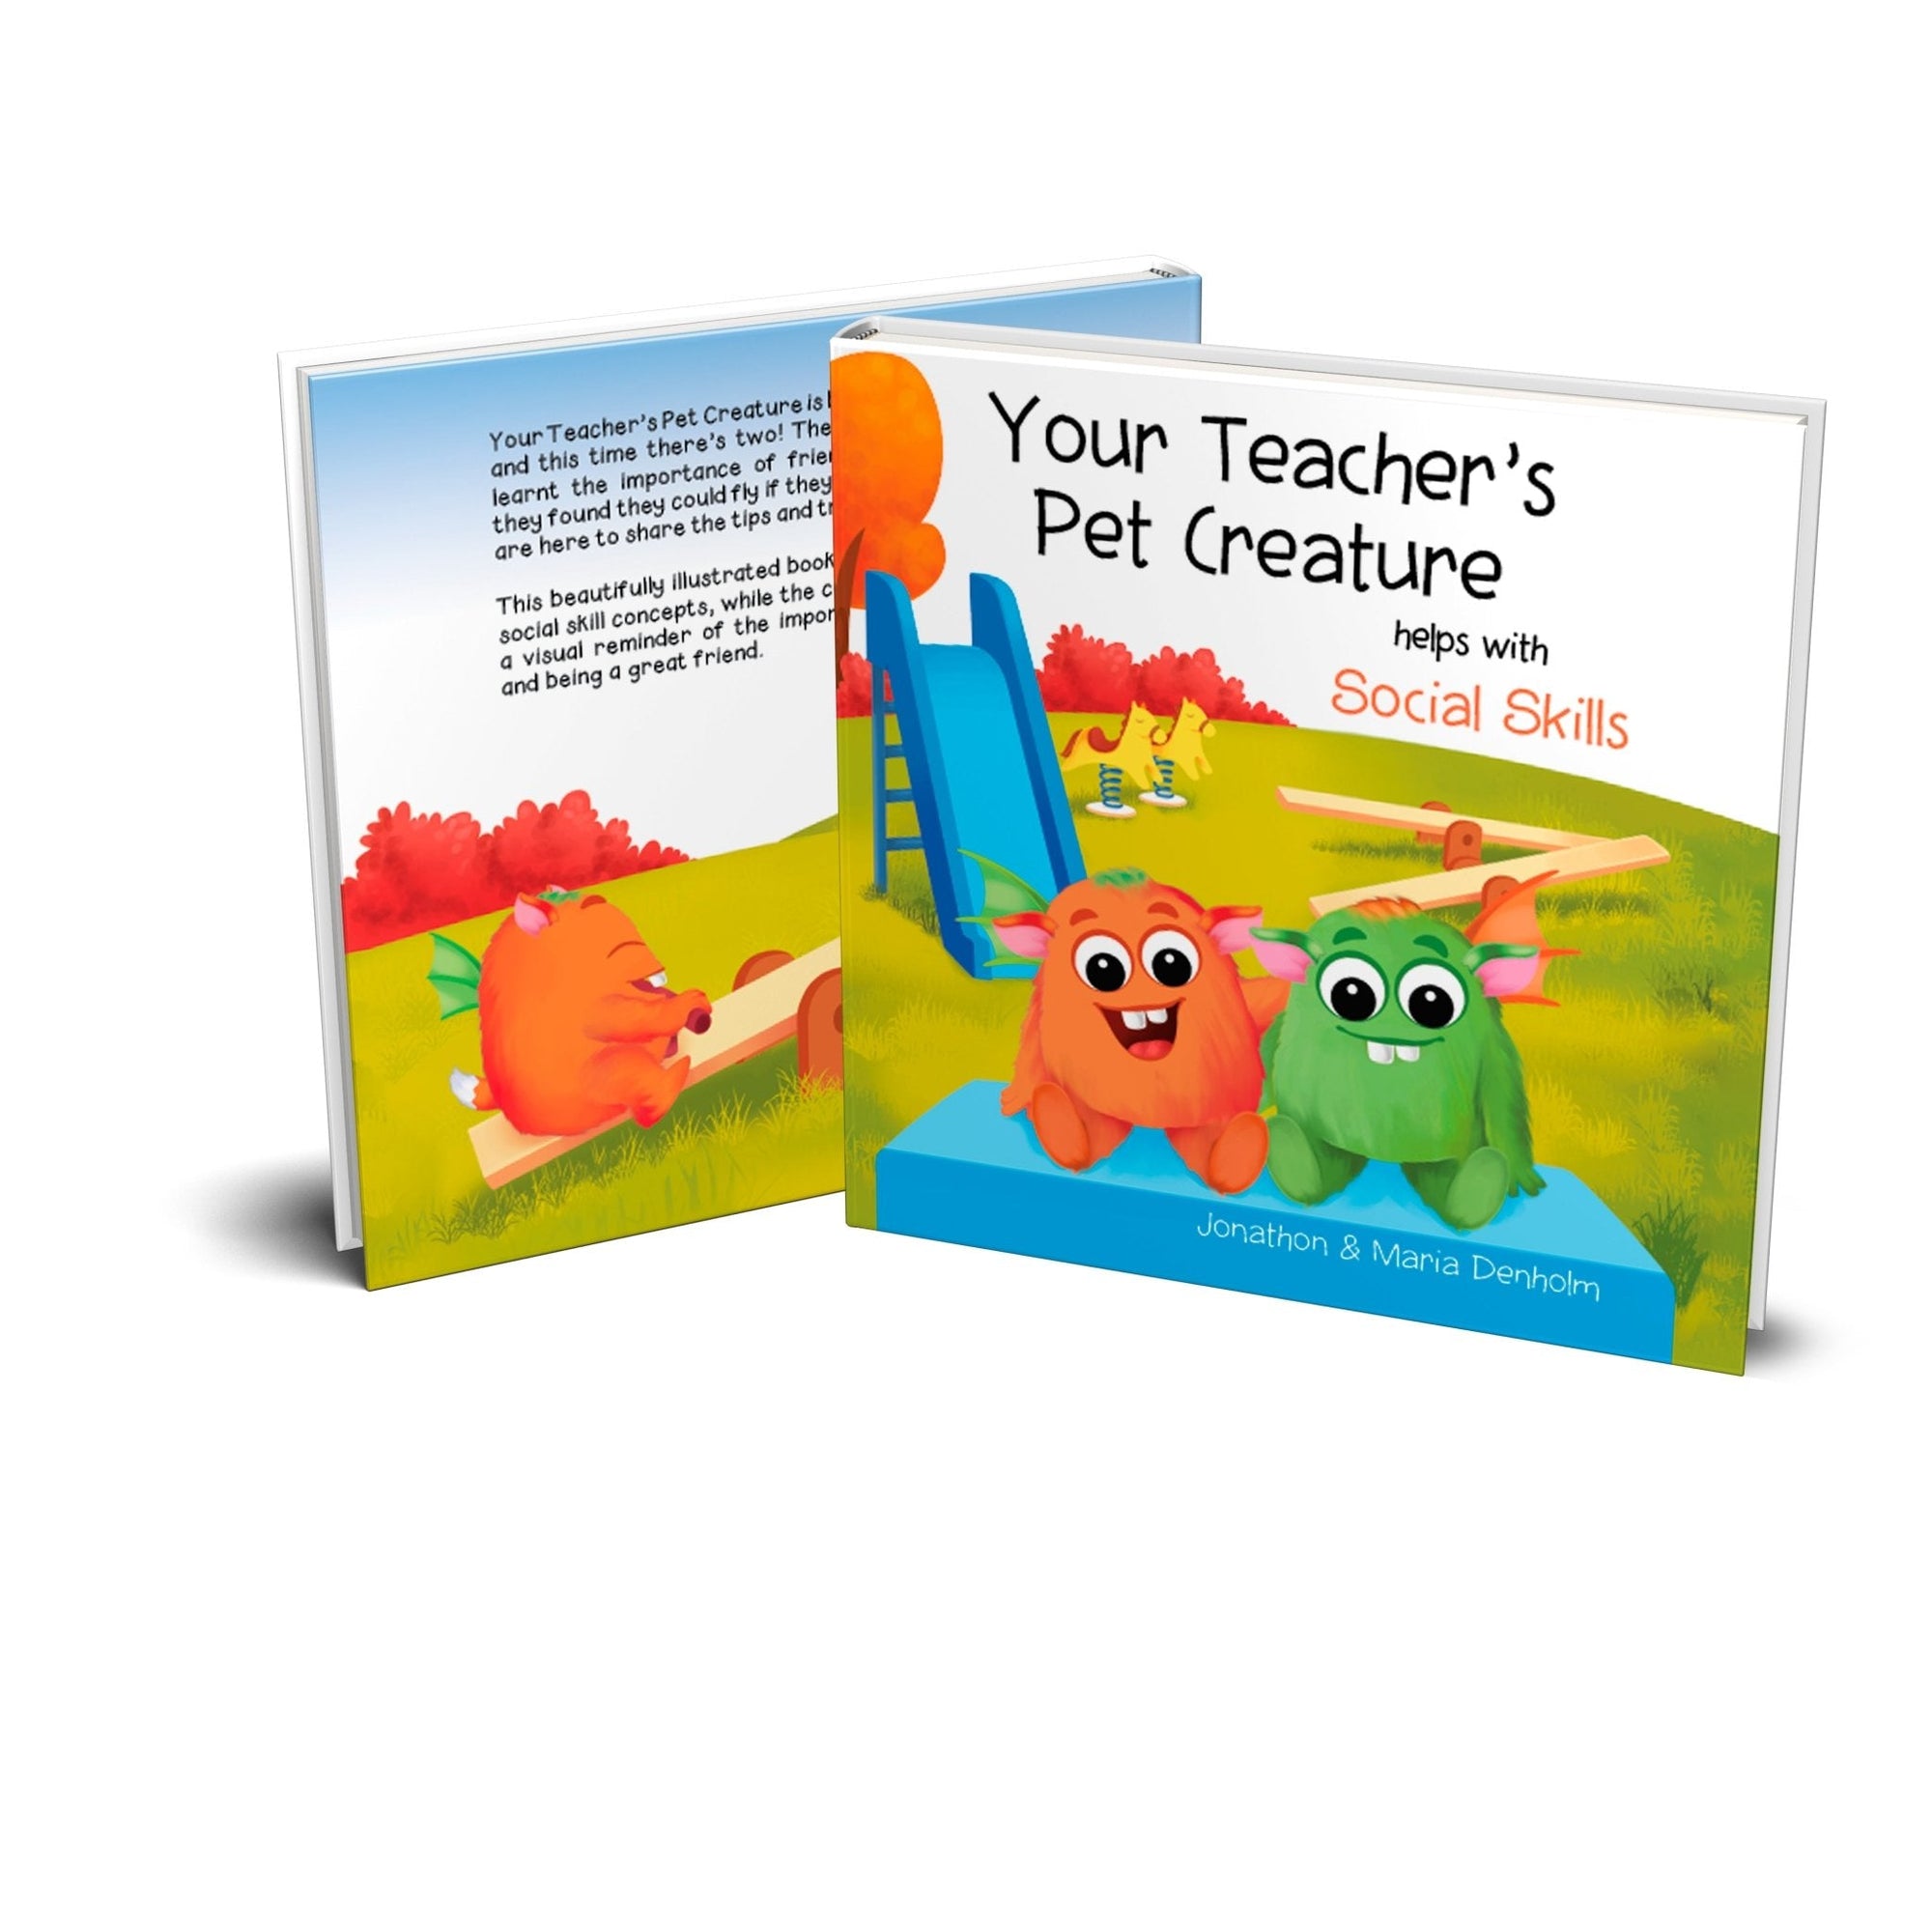 YTPC - Helps with Social Skills (Hardcover) - Your Teacher's Pet Creature